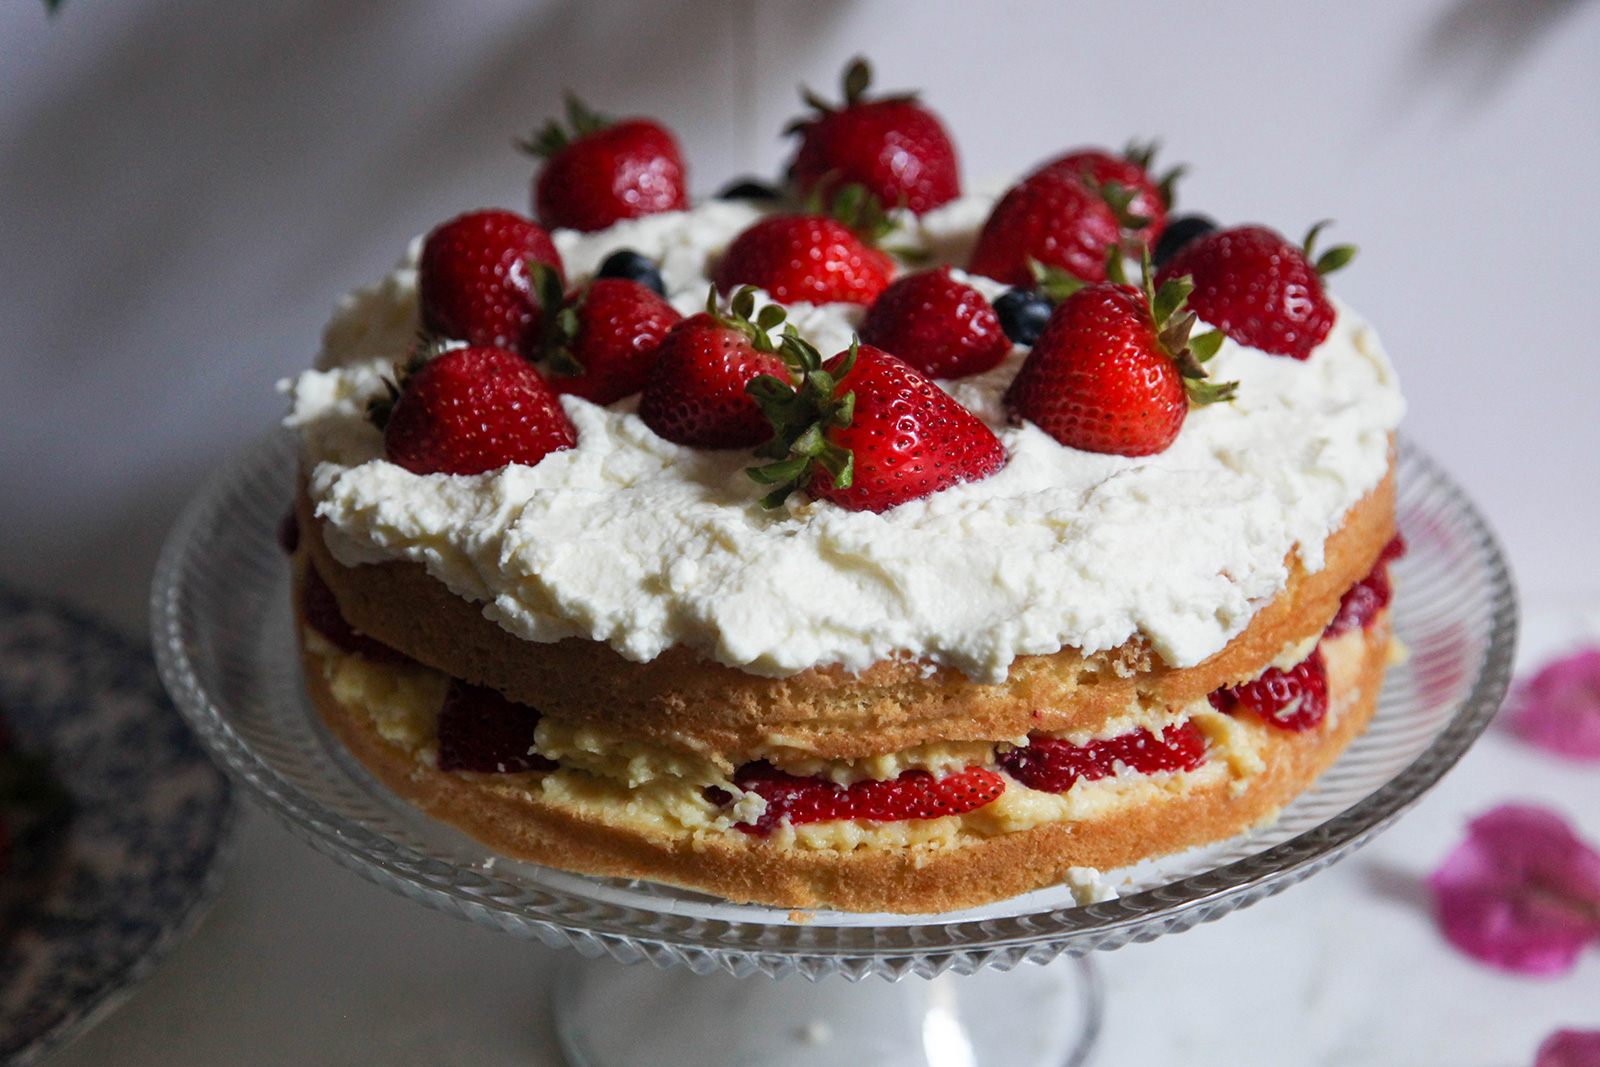 Strawberry Cake with Chantilly Cream, decorated and ready to serve